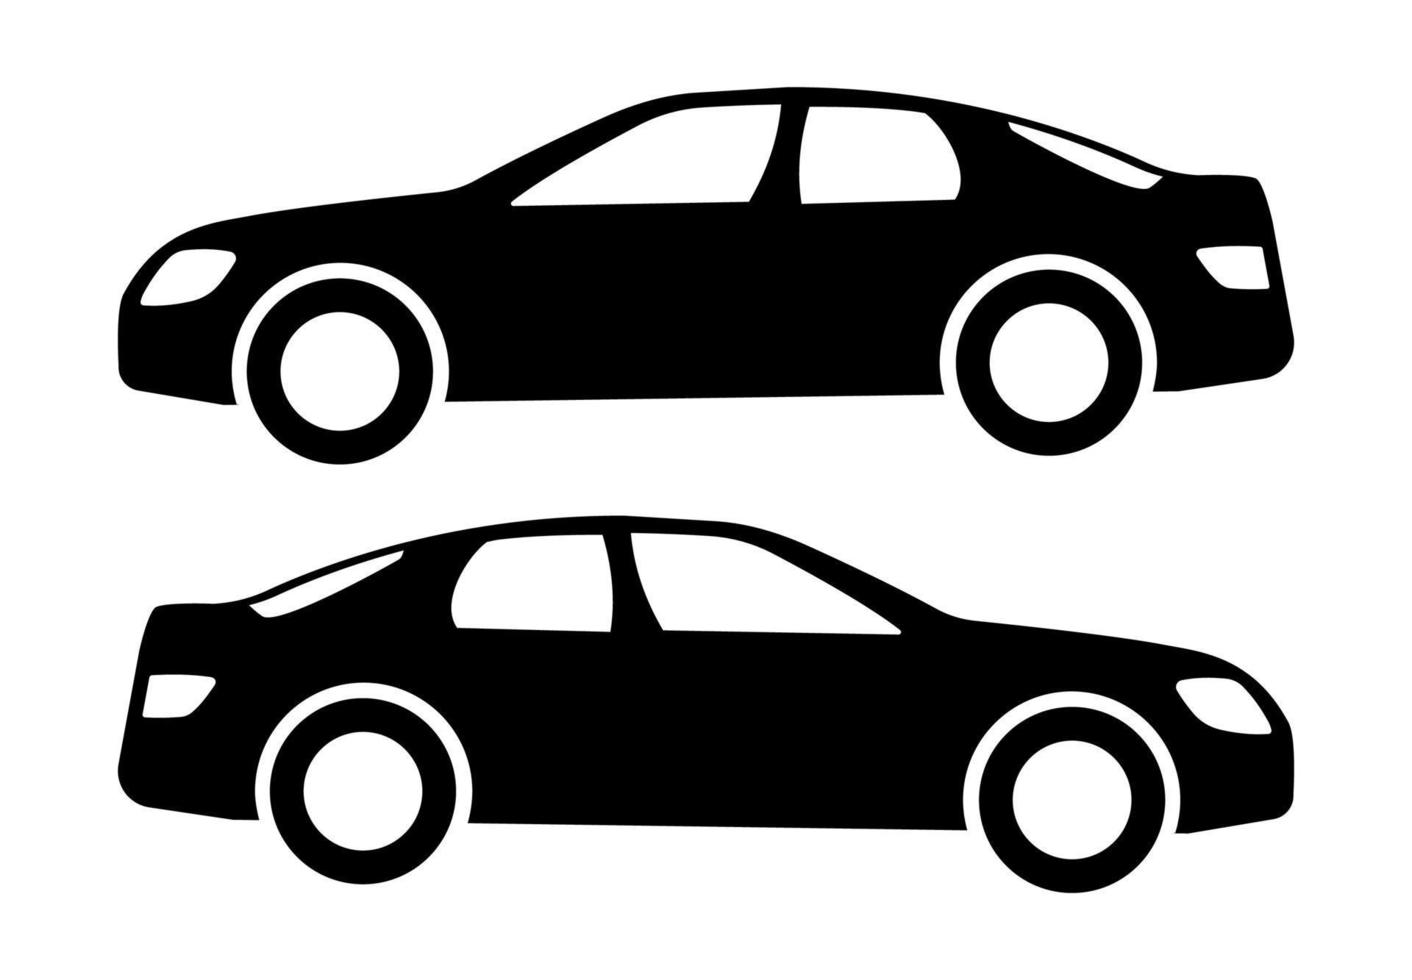 Two black car silhouettes on a white background. Vector illustration.